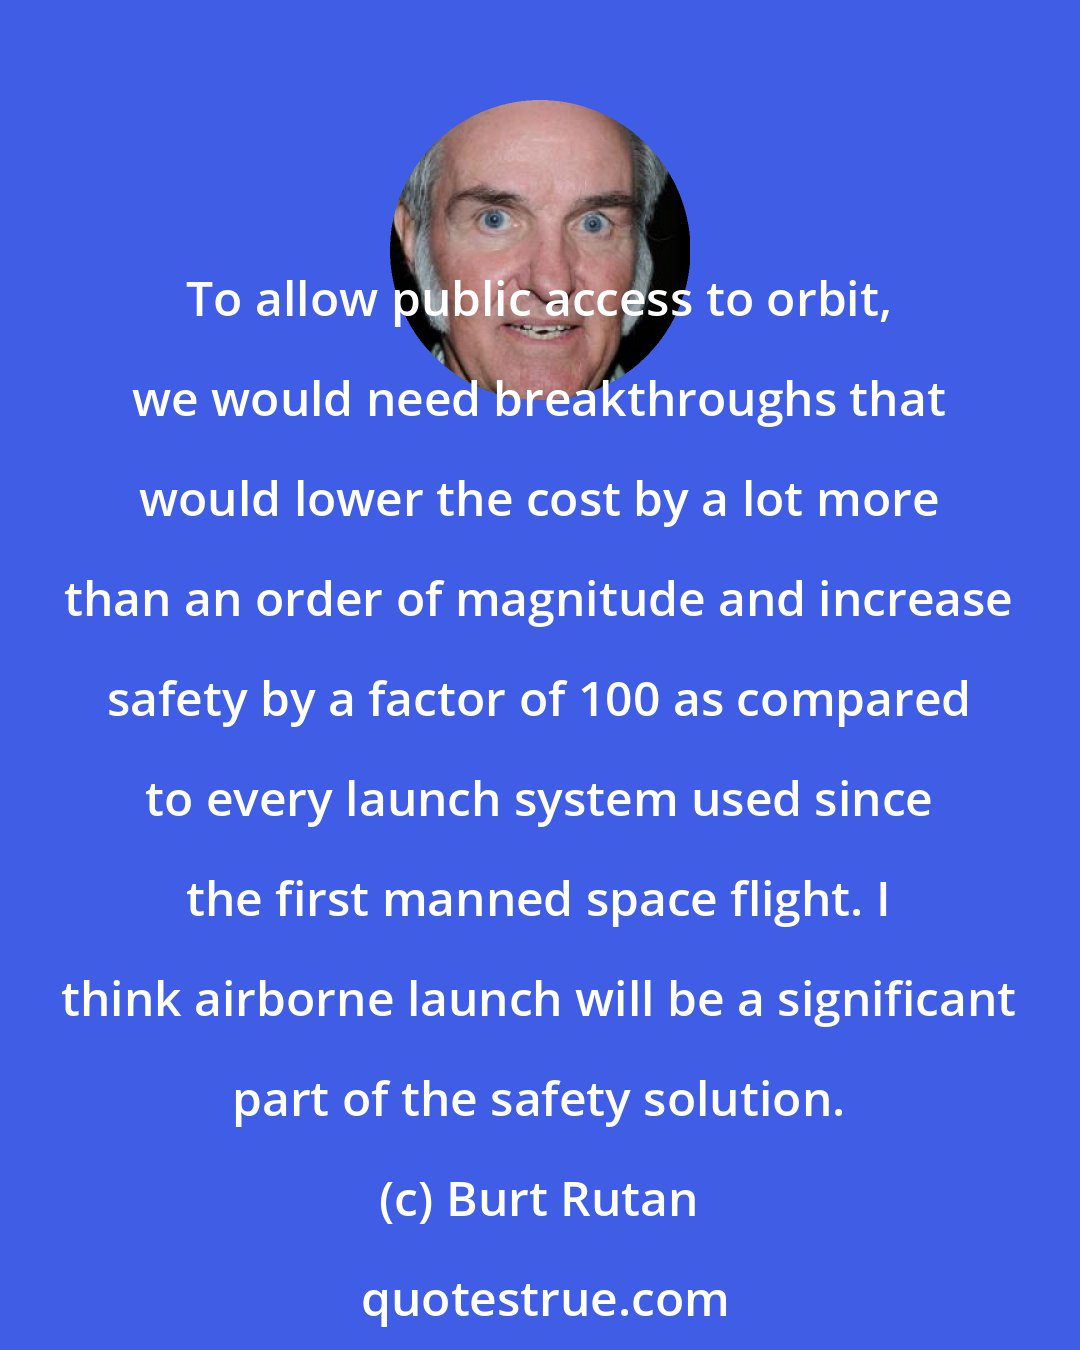 Burt Rutan: To allow public access to orbit, we would need breakthroughs that would lower the cost by a lot more than an order of magnitude and increase safety by a factor of 100 as compared to every launch system used since the first manned space flight. I think airborne launch will be a significant part of the safety solution.